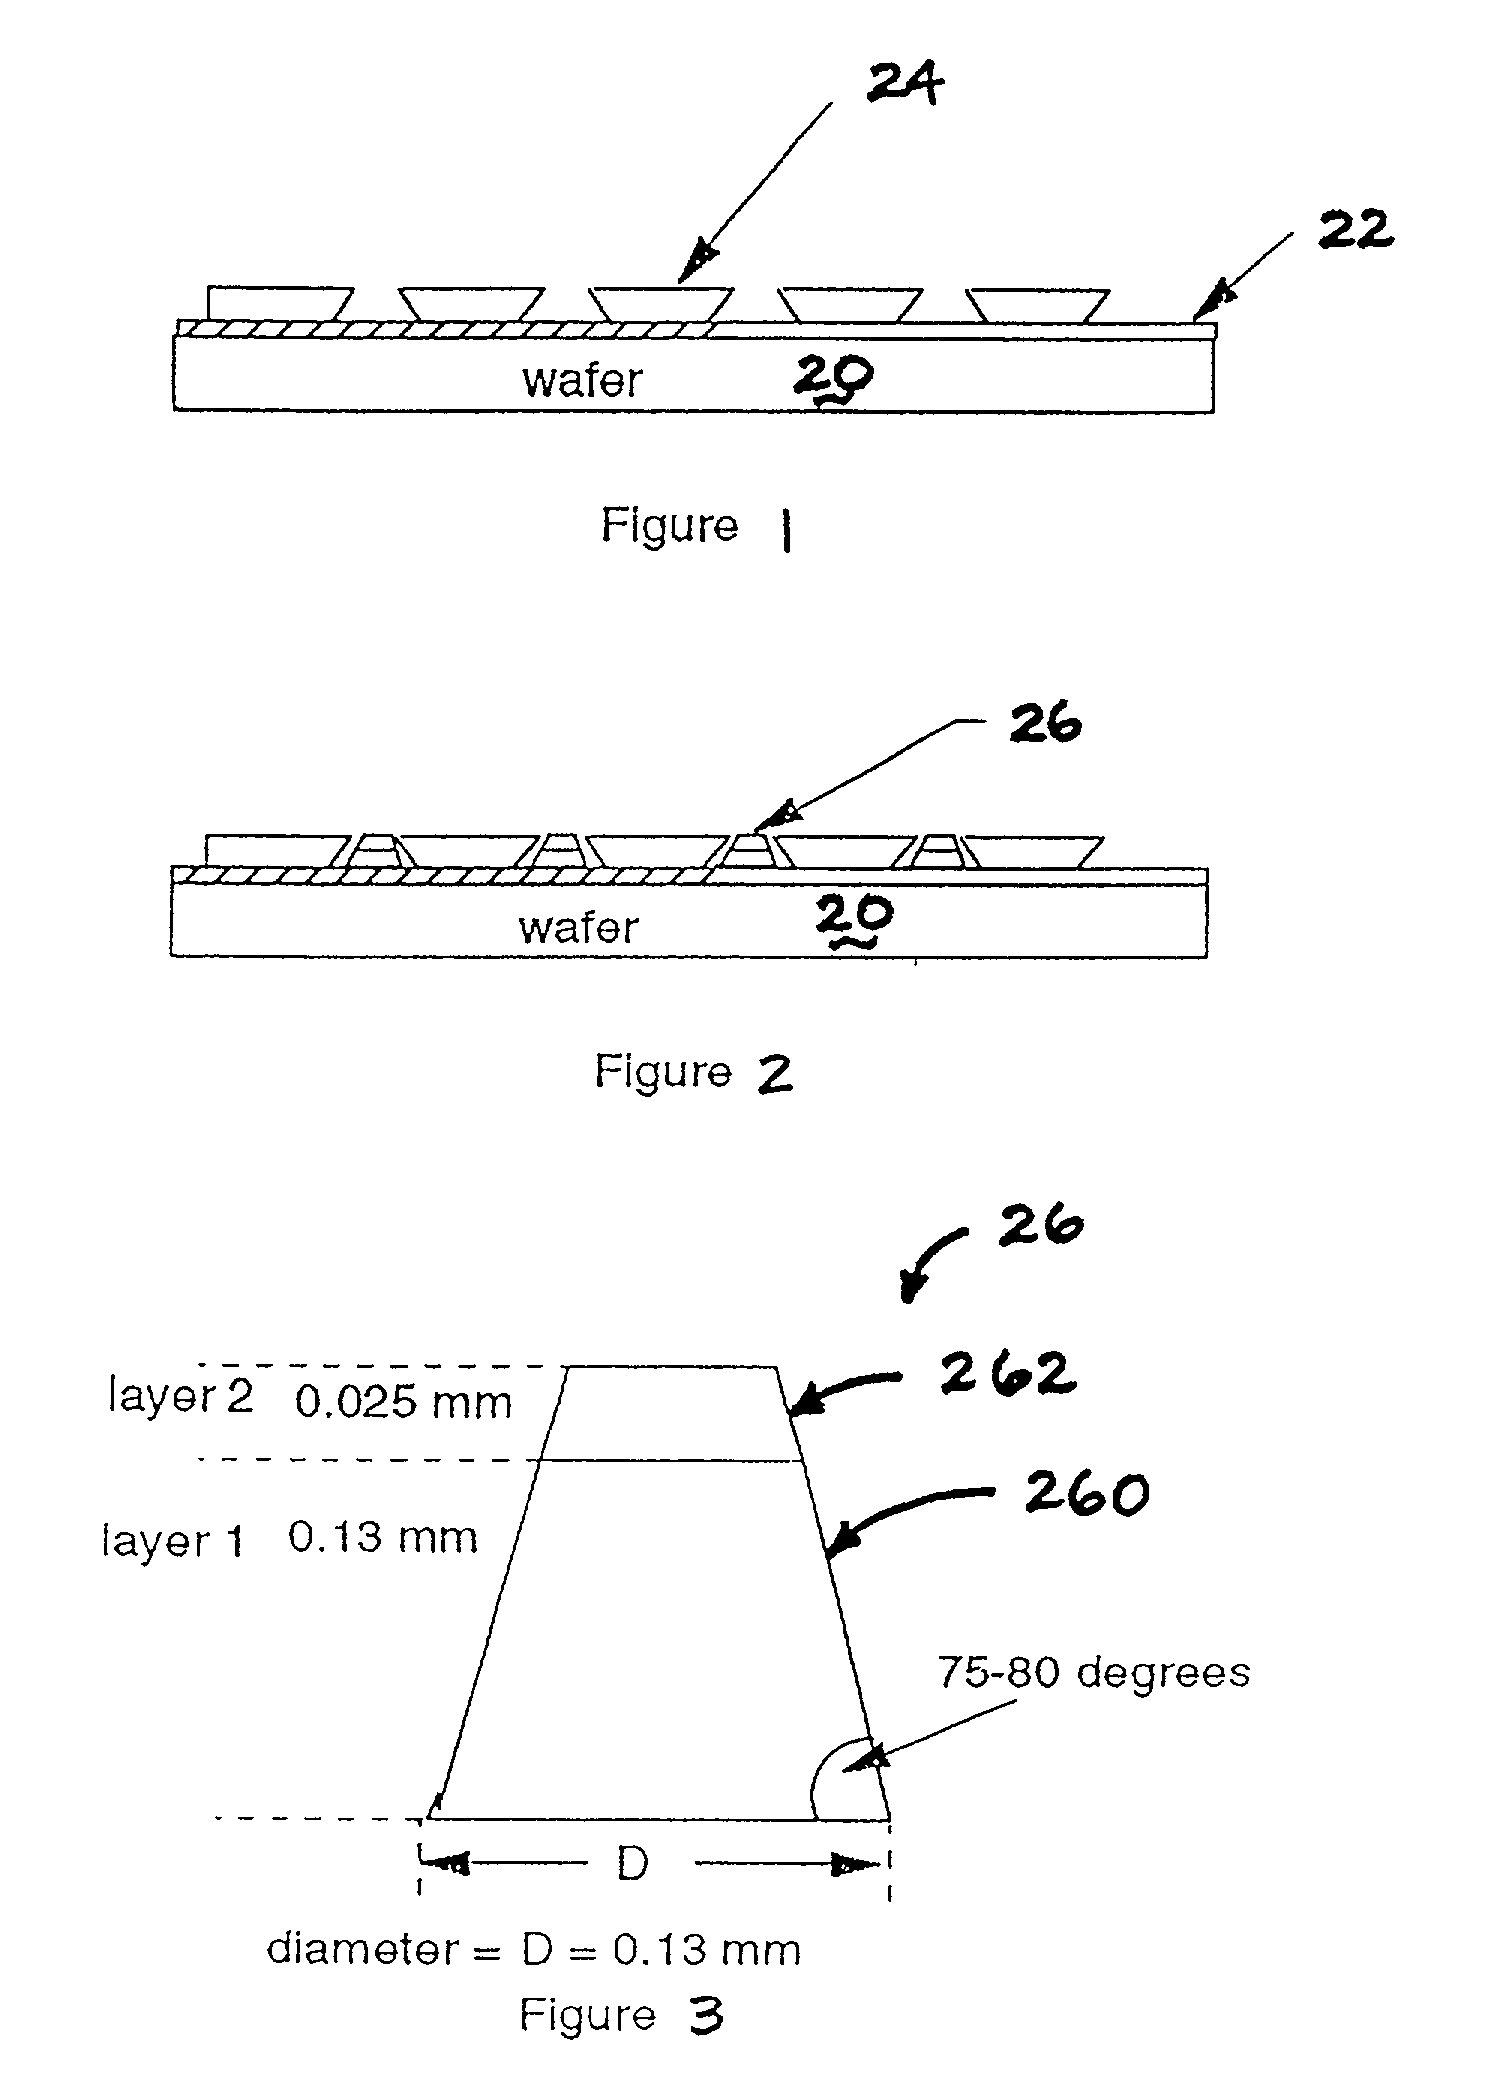 Process for forming cone shaped solder for chip interconnection